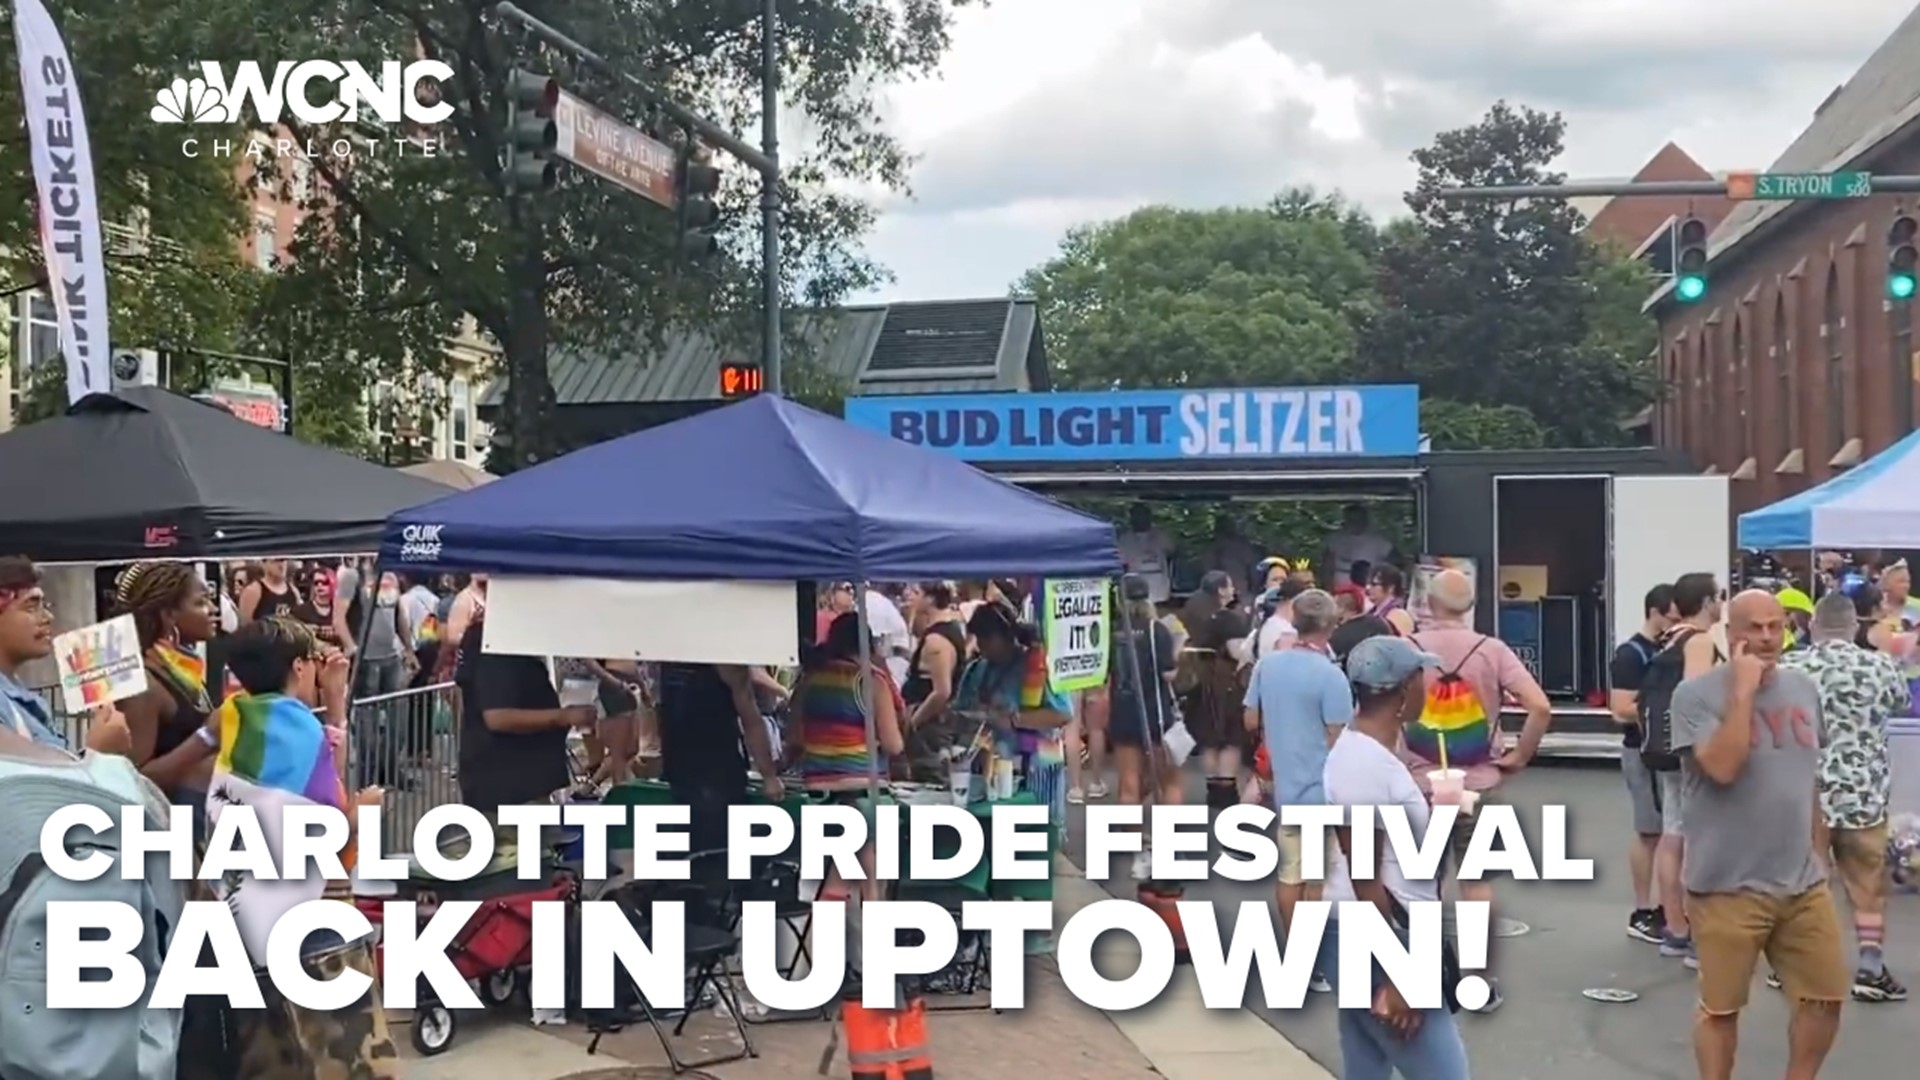 Charlotte Pride returned this weekend after a two-year hiatus, and organizers say its message of diversity and acceptance for the LGBTQ community has never resonated